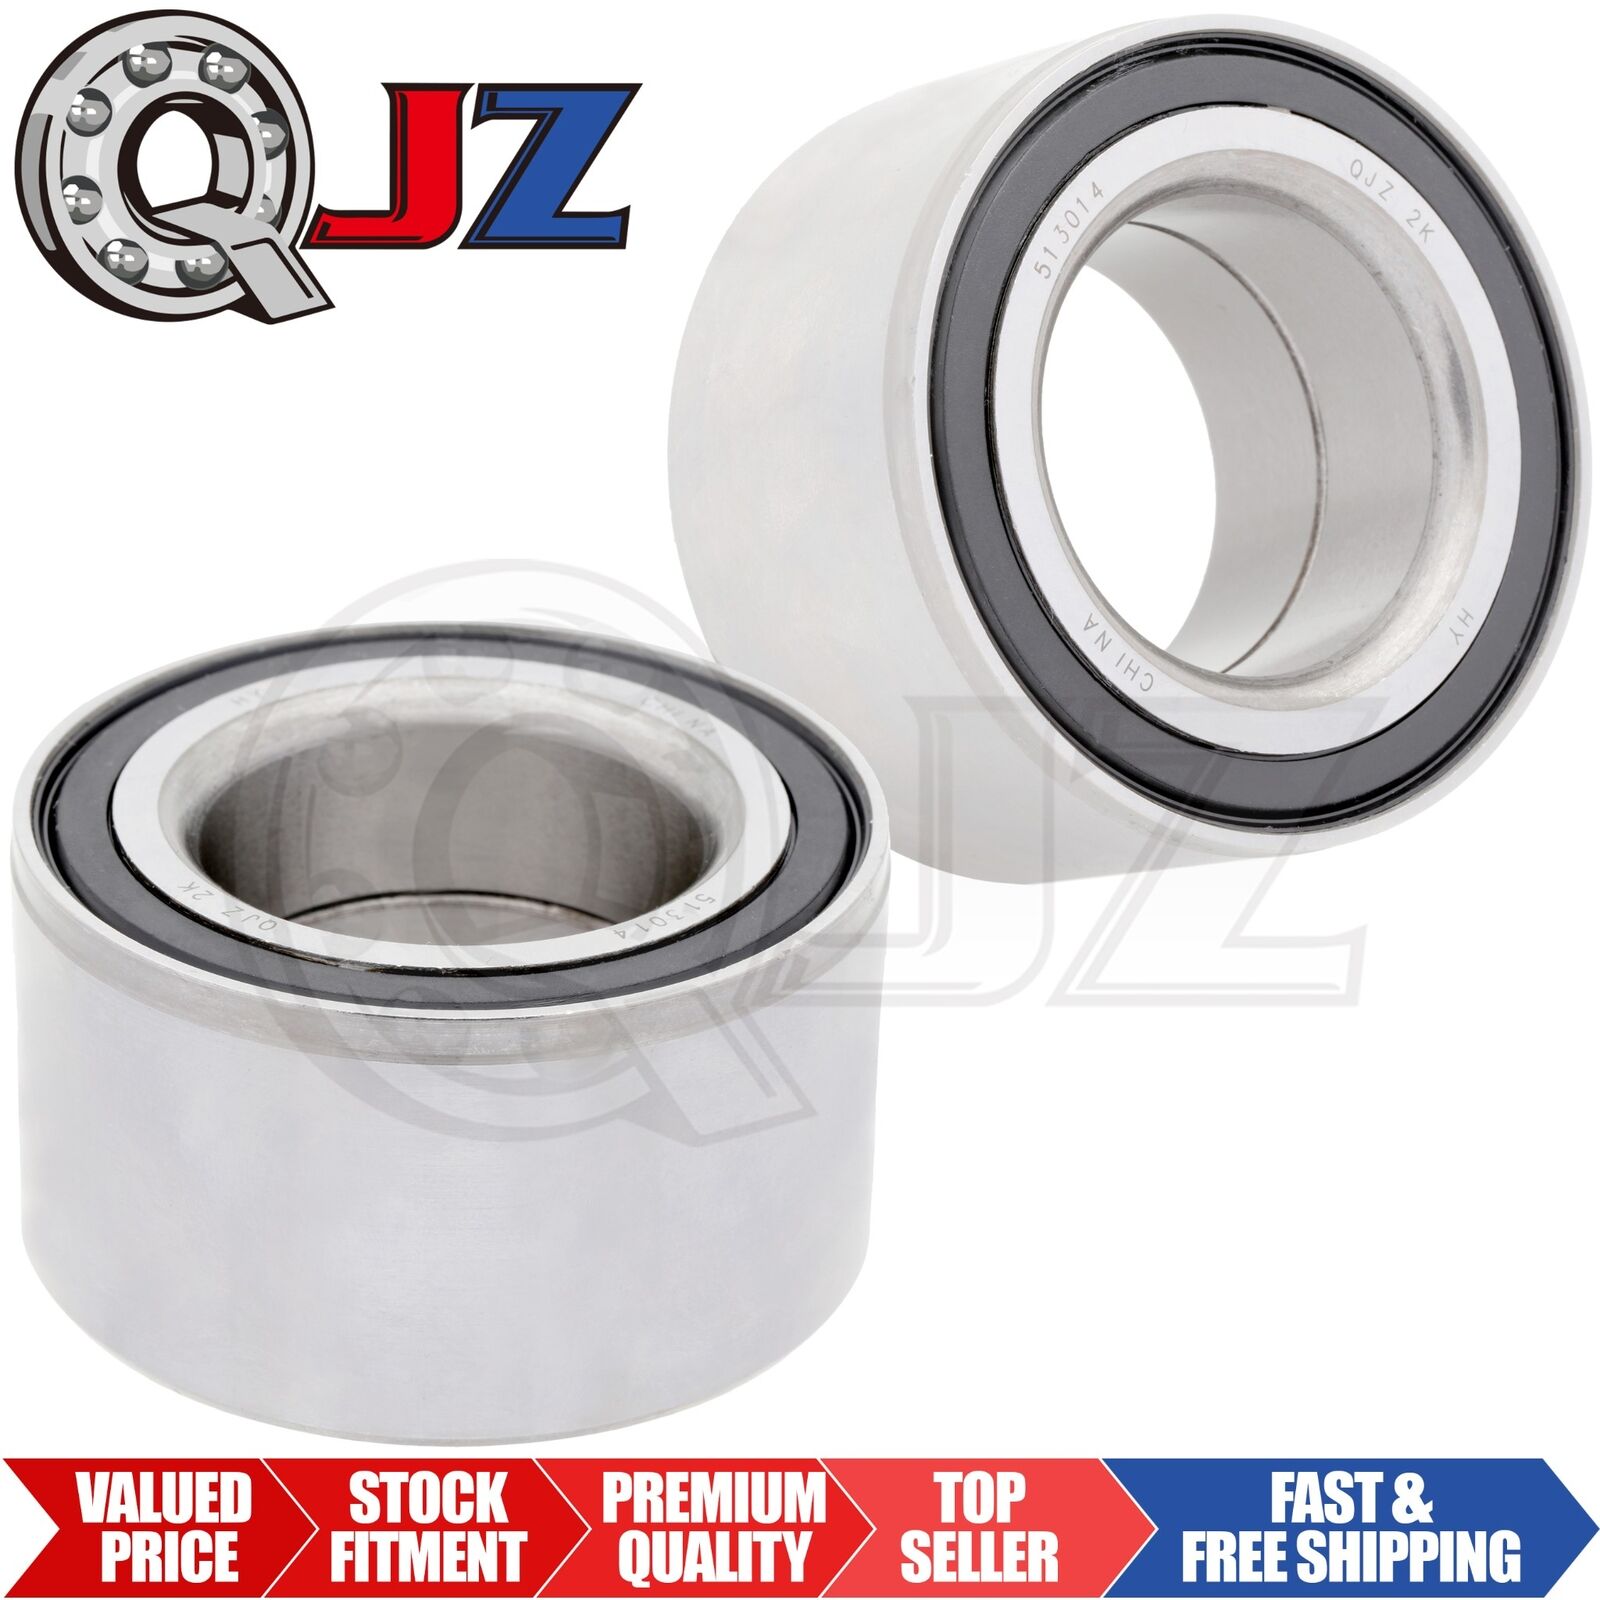 [FRONT(Qty.2)] Wheel Hub Bearing [68mm OD] For 1982-1988 Volkswagen Quantum FWD